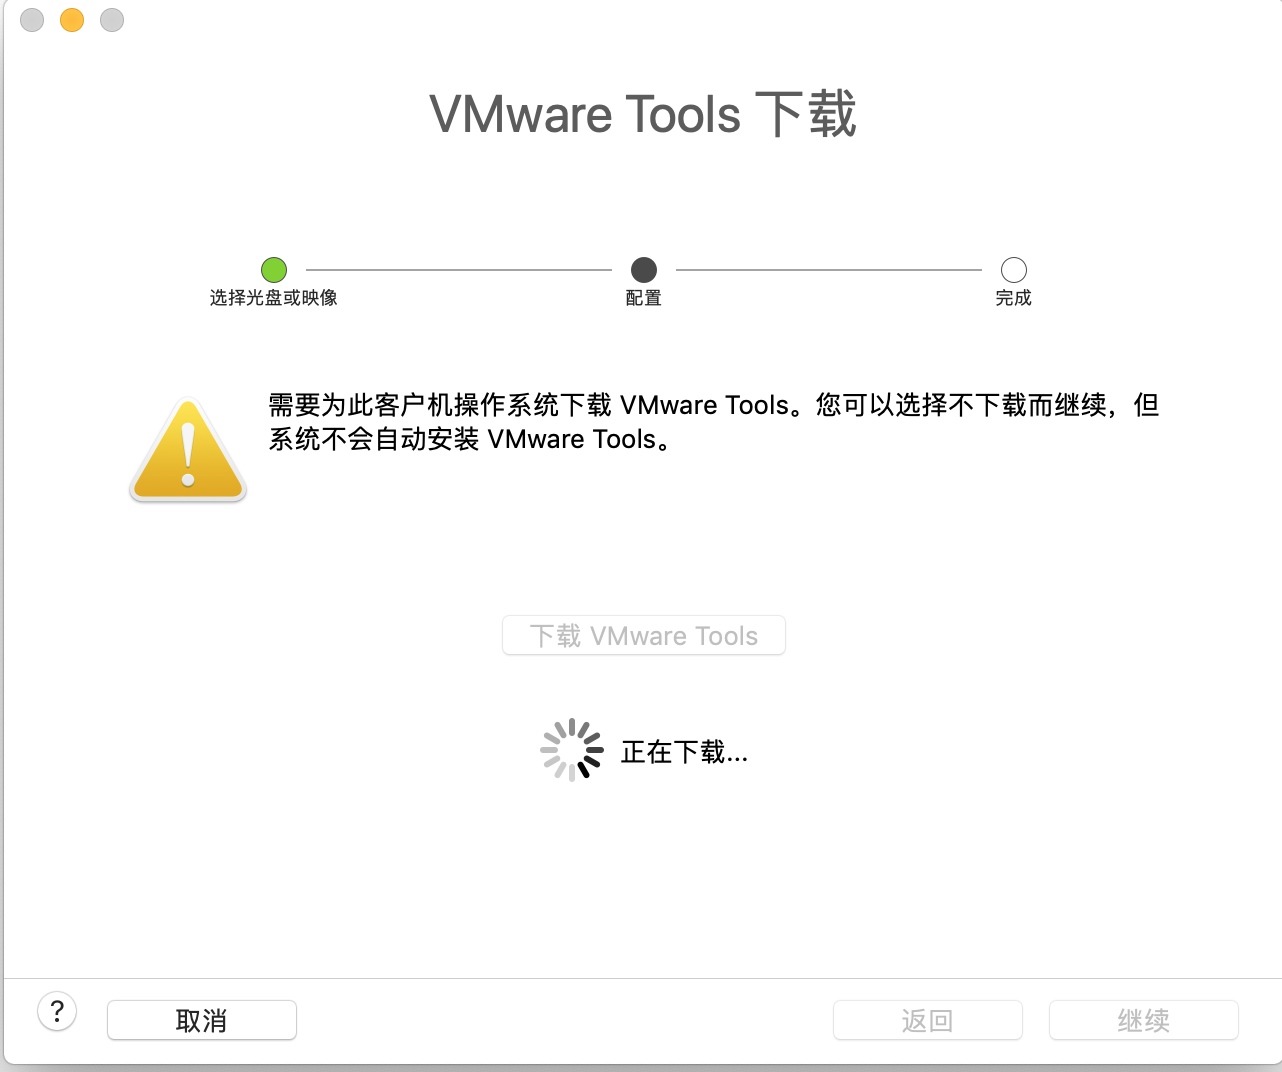 os-win7-new-tools.png